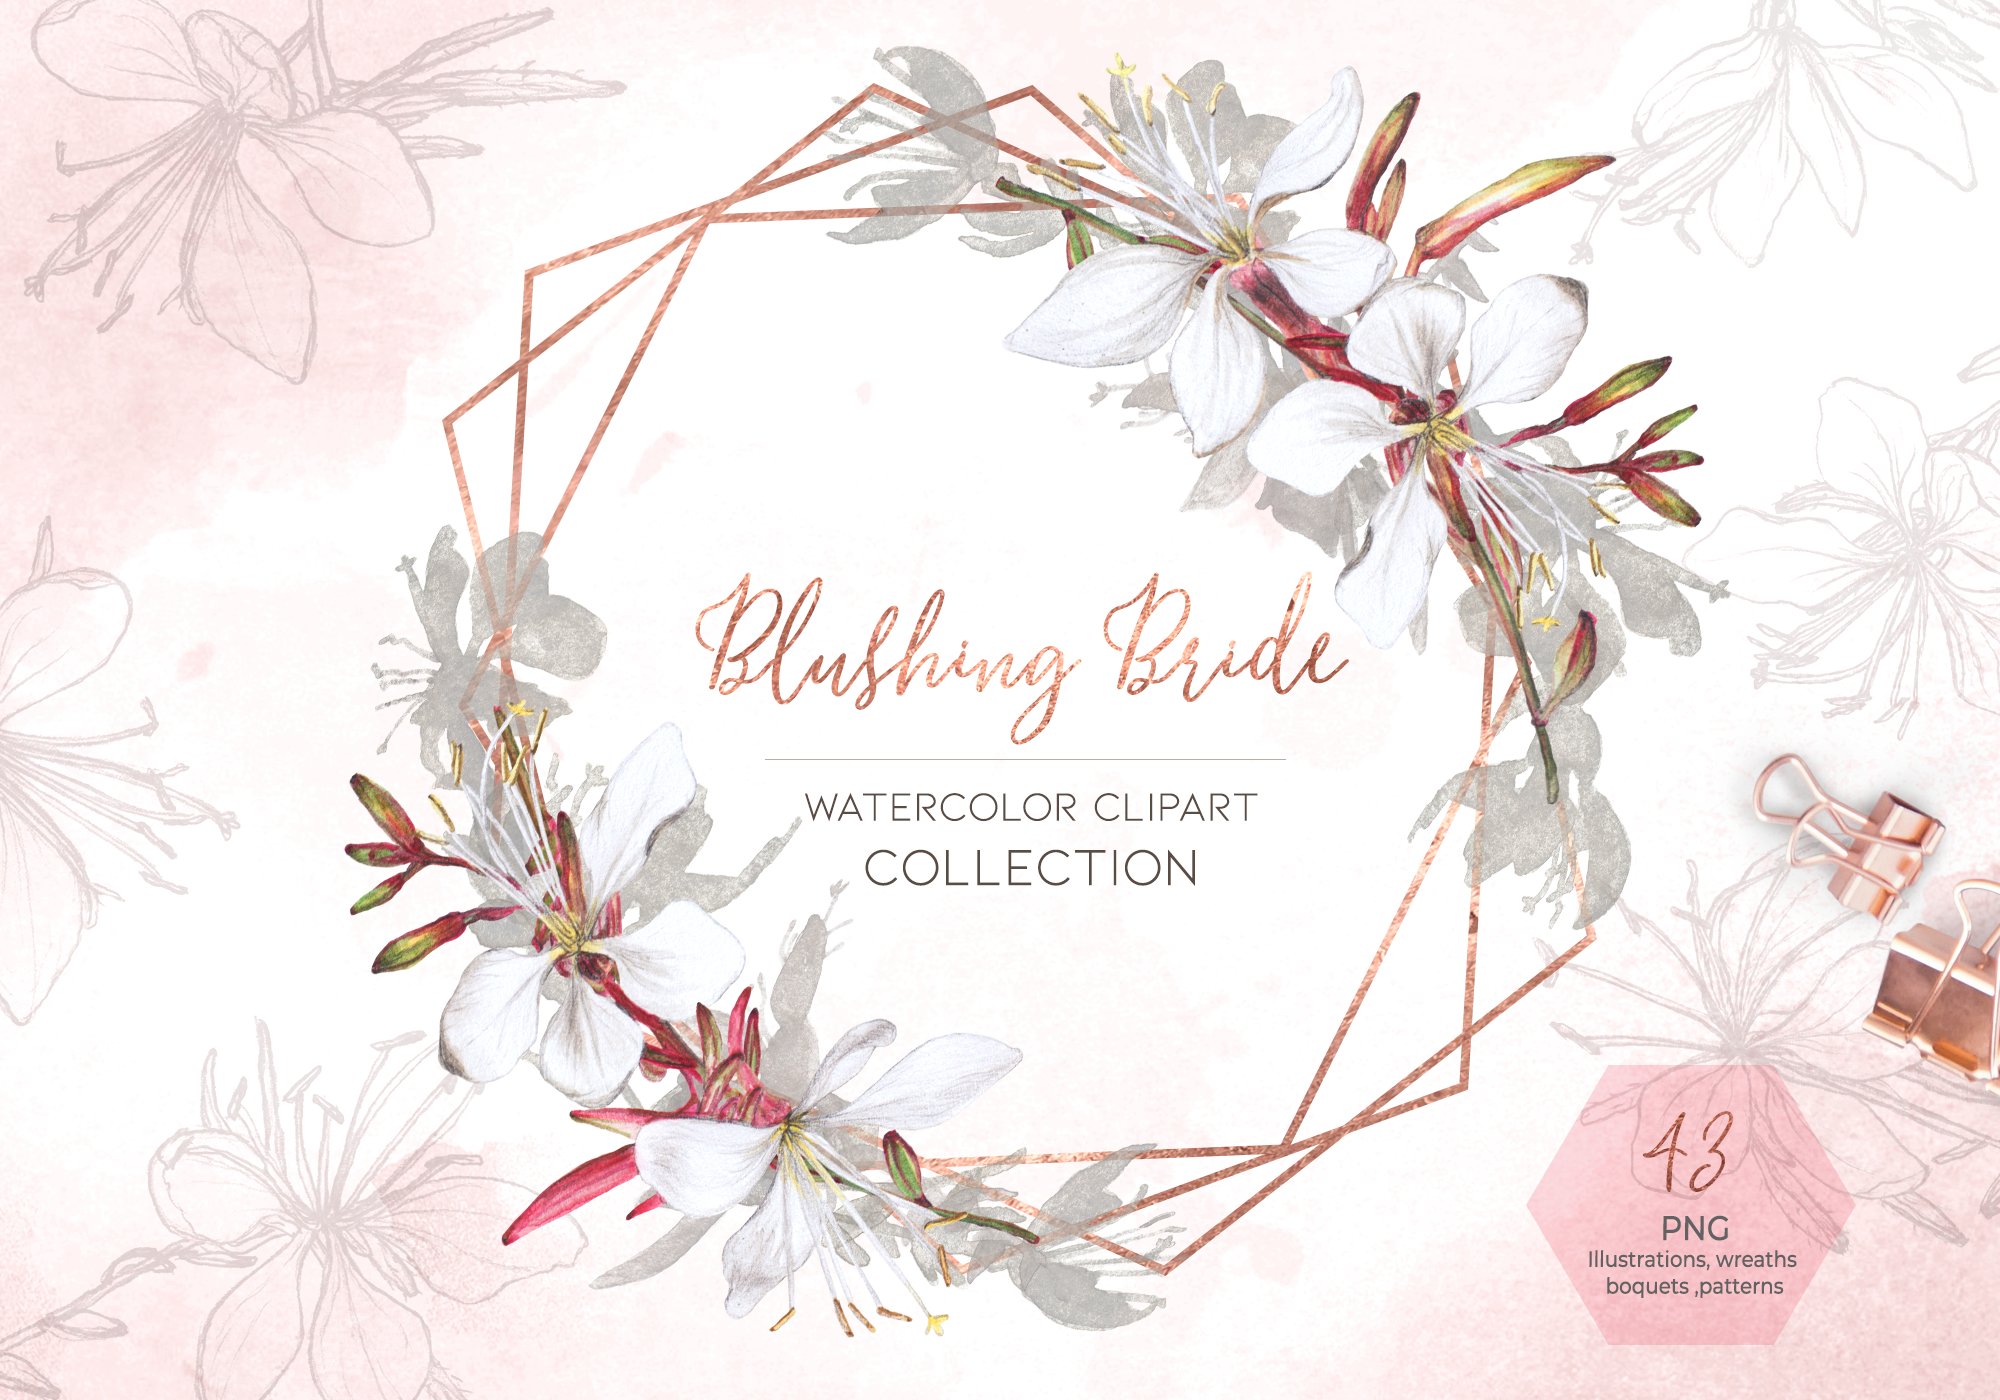 Blushing Bride Floral Collection cover image.